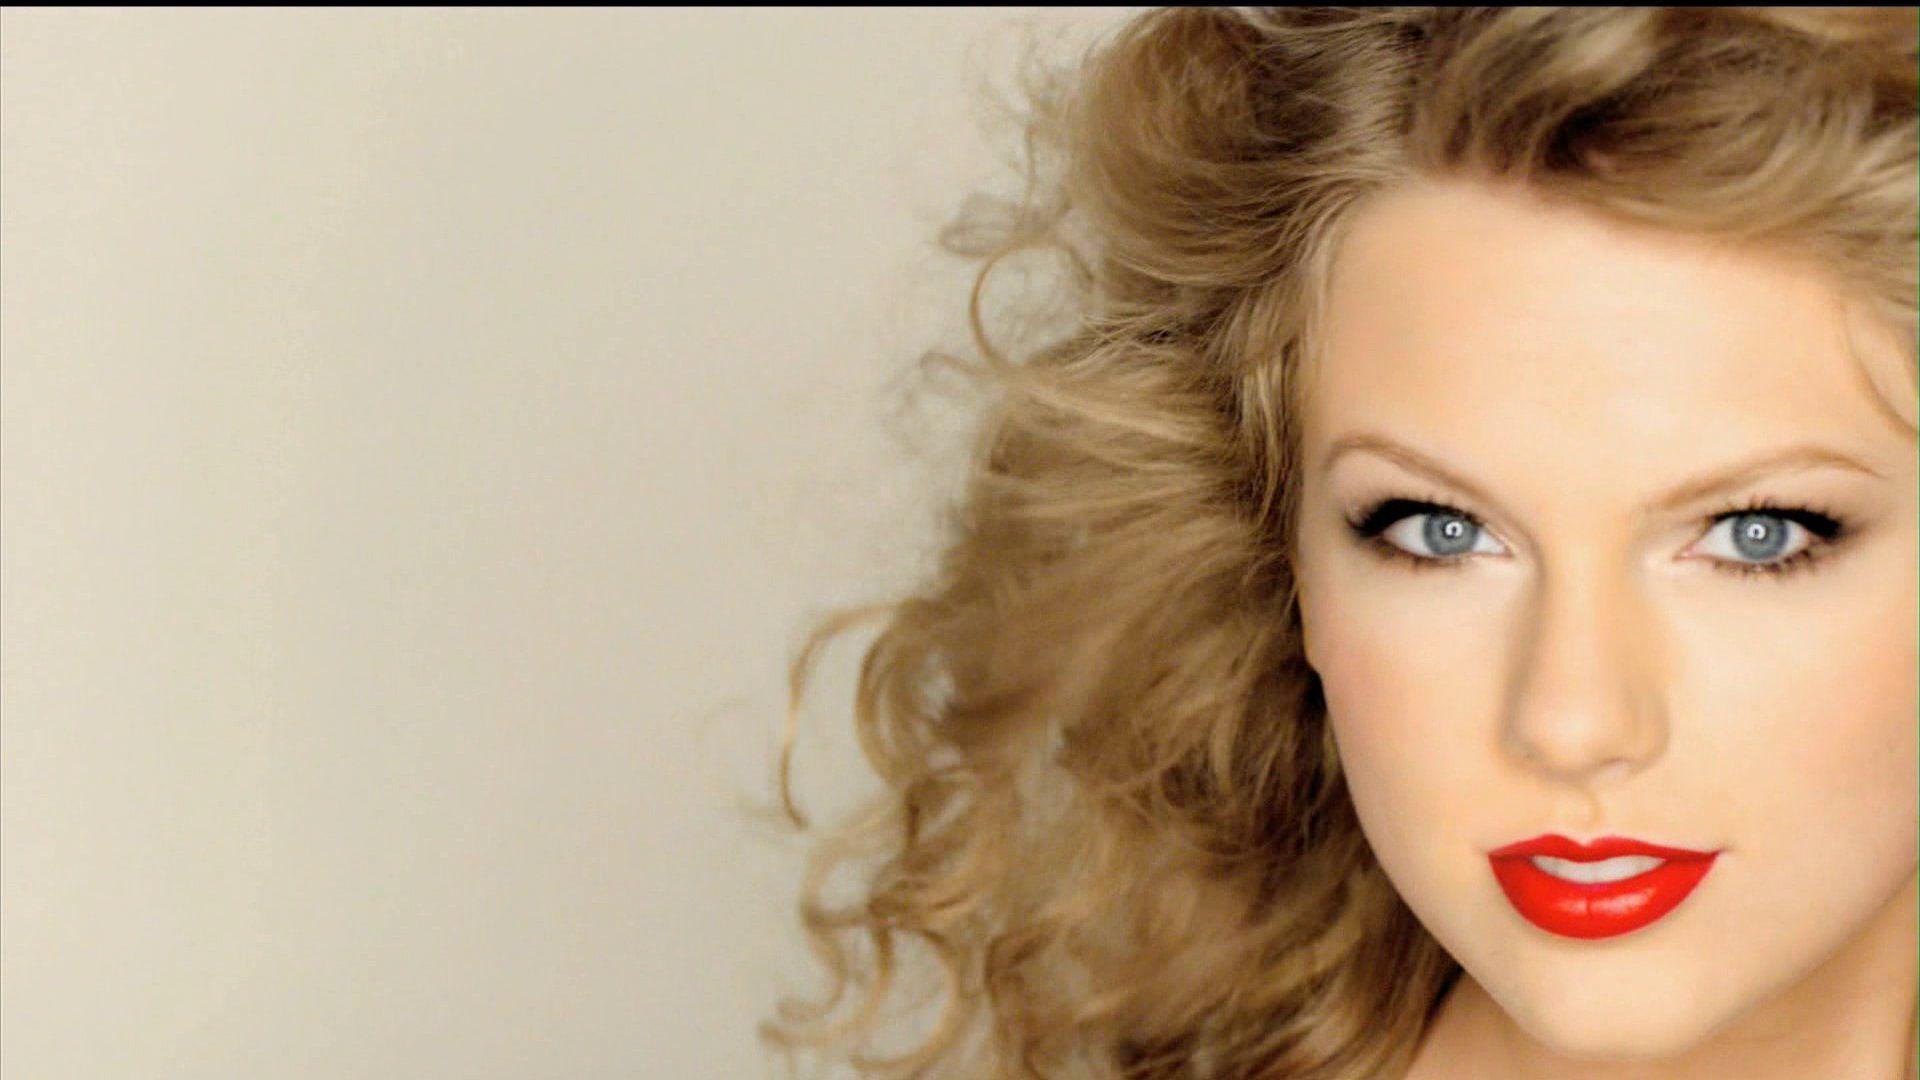 Taylor Swift Image Wallpaper 23971 High Resolution. download all